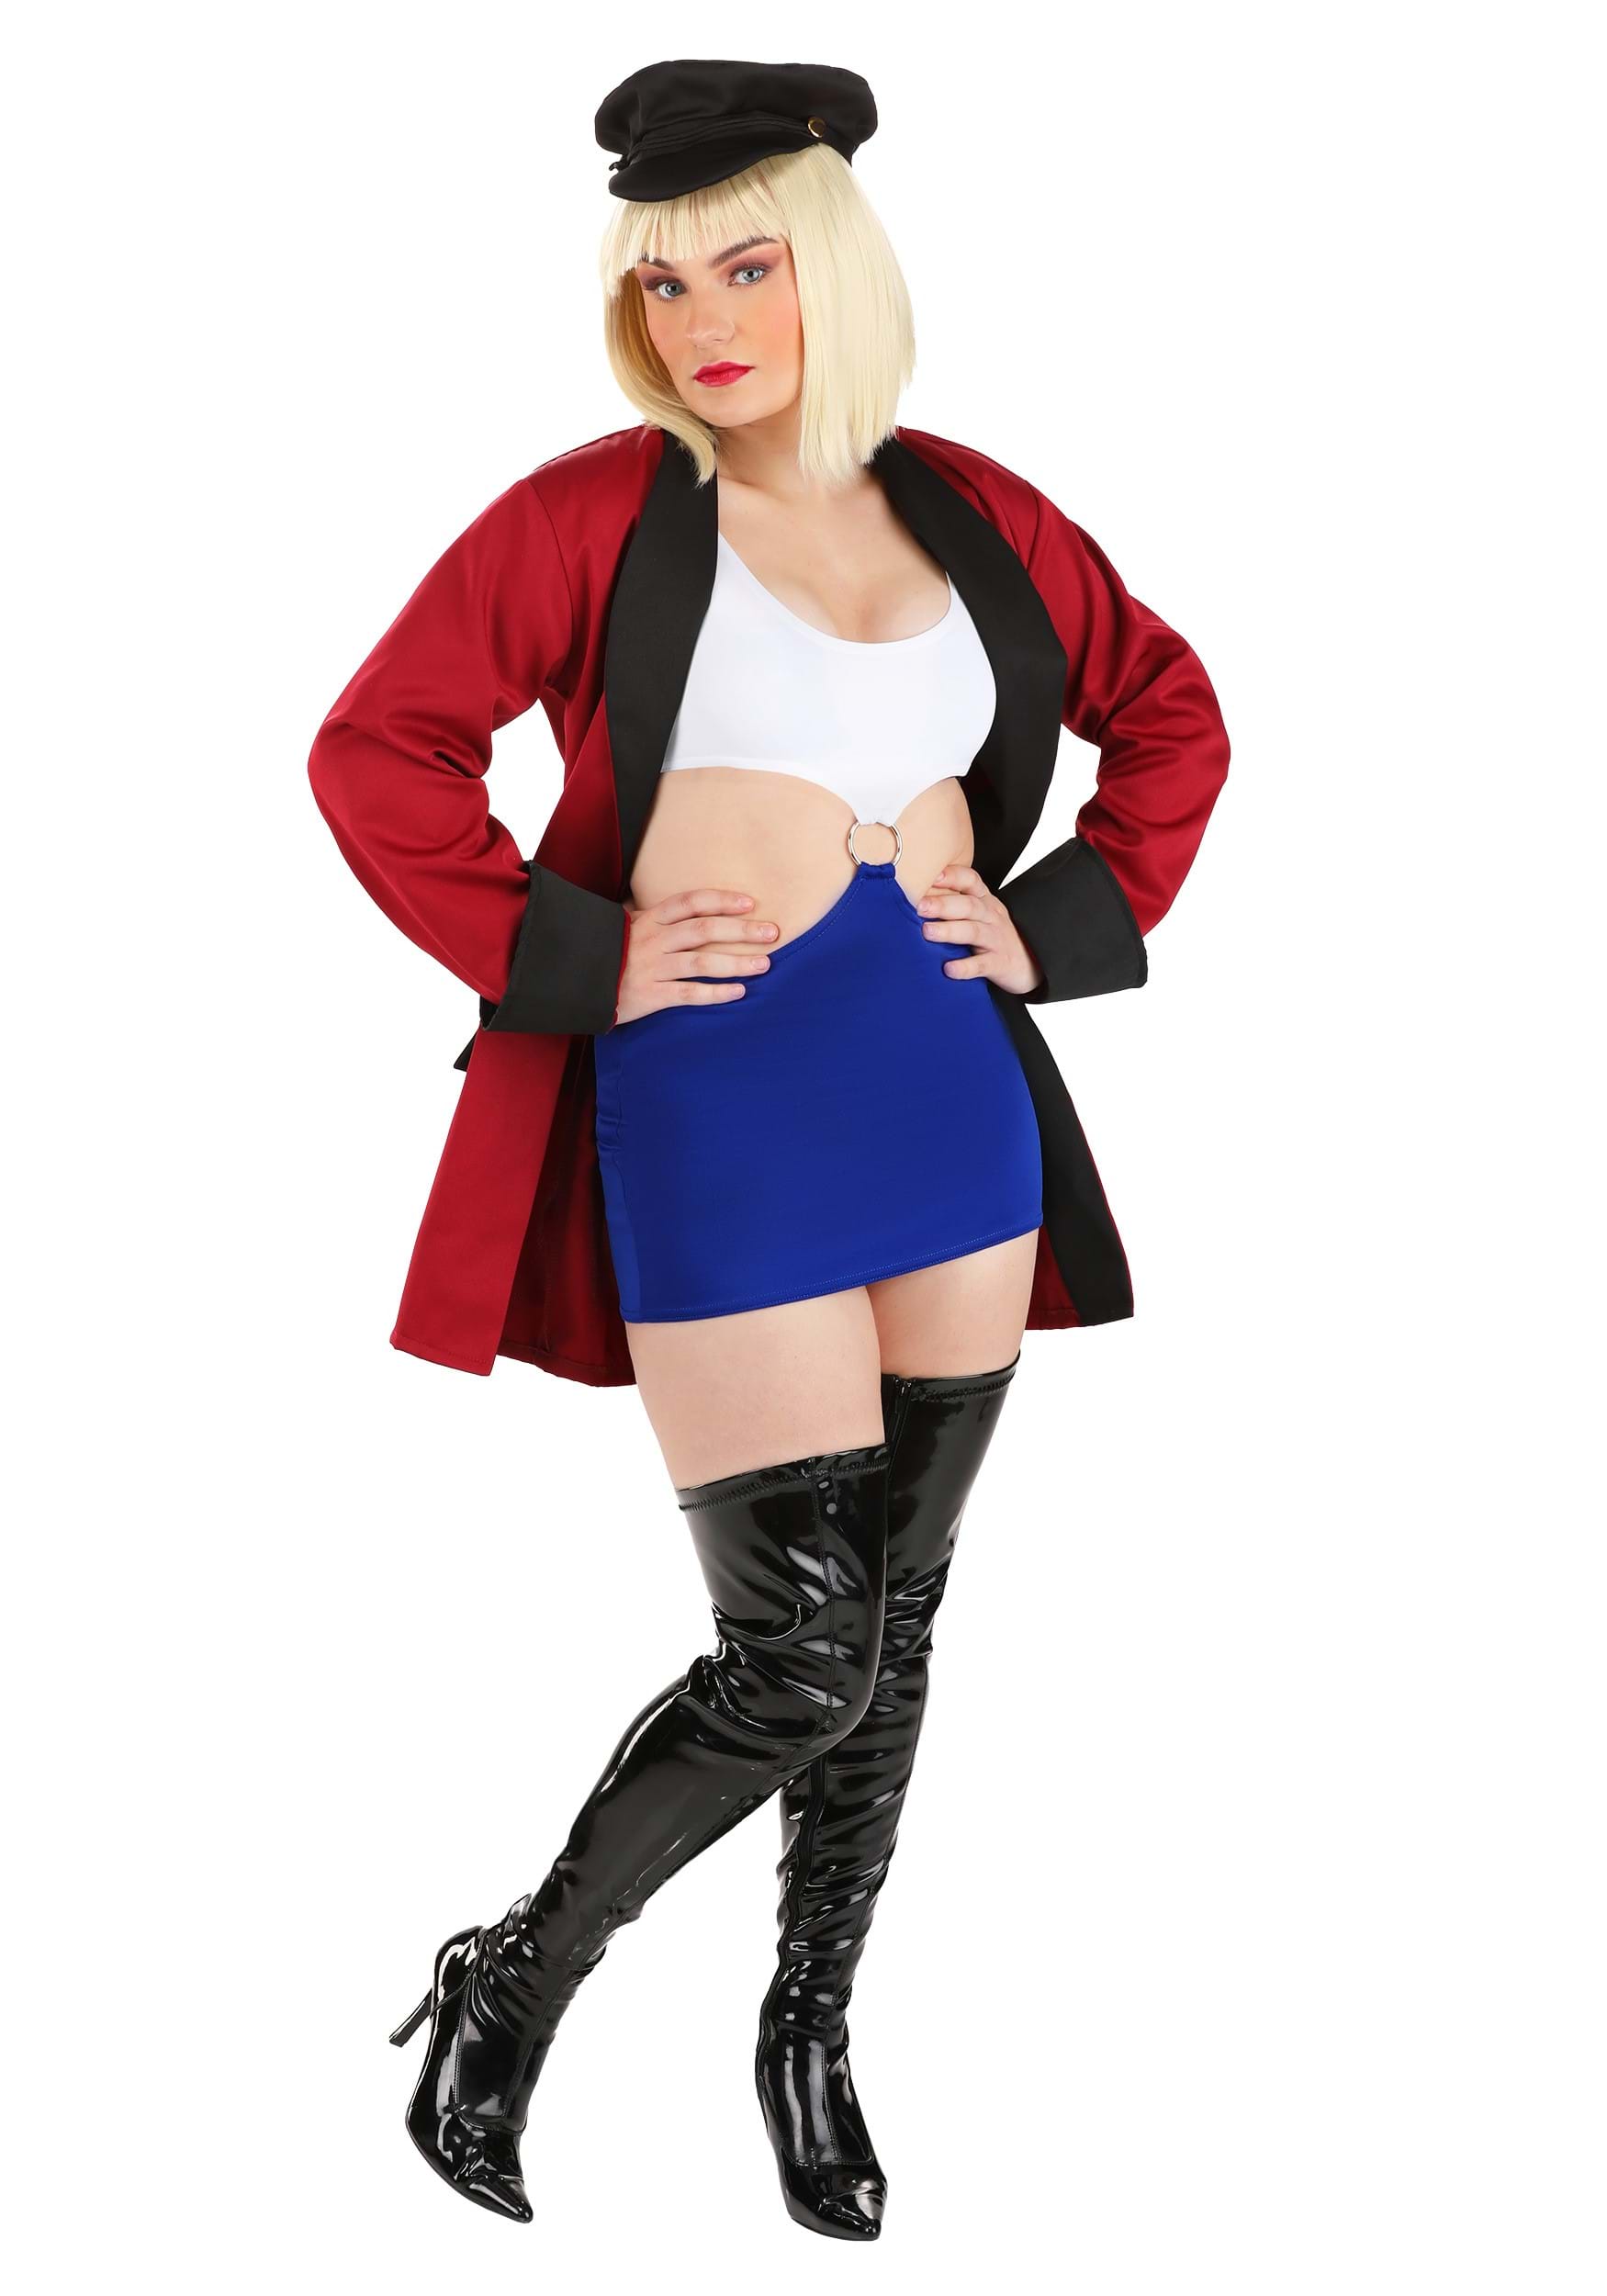 Exclusive Pretty Lady Costume For Women , TV Show Costumes